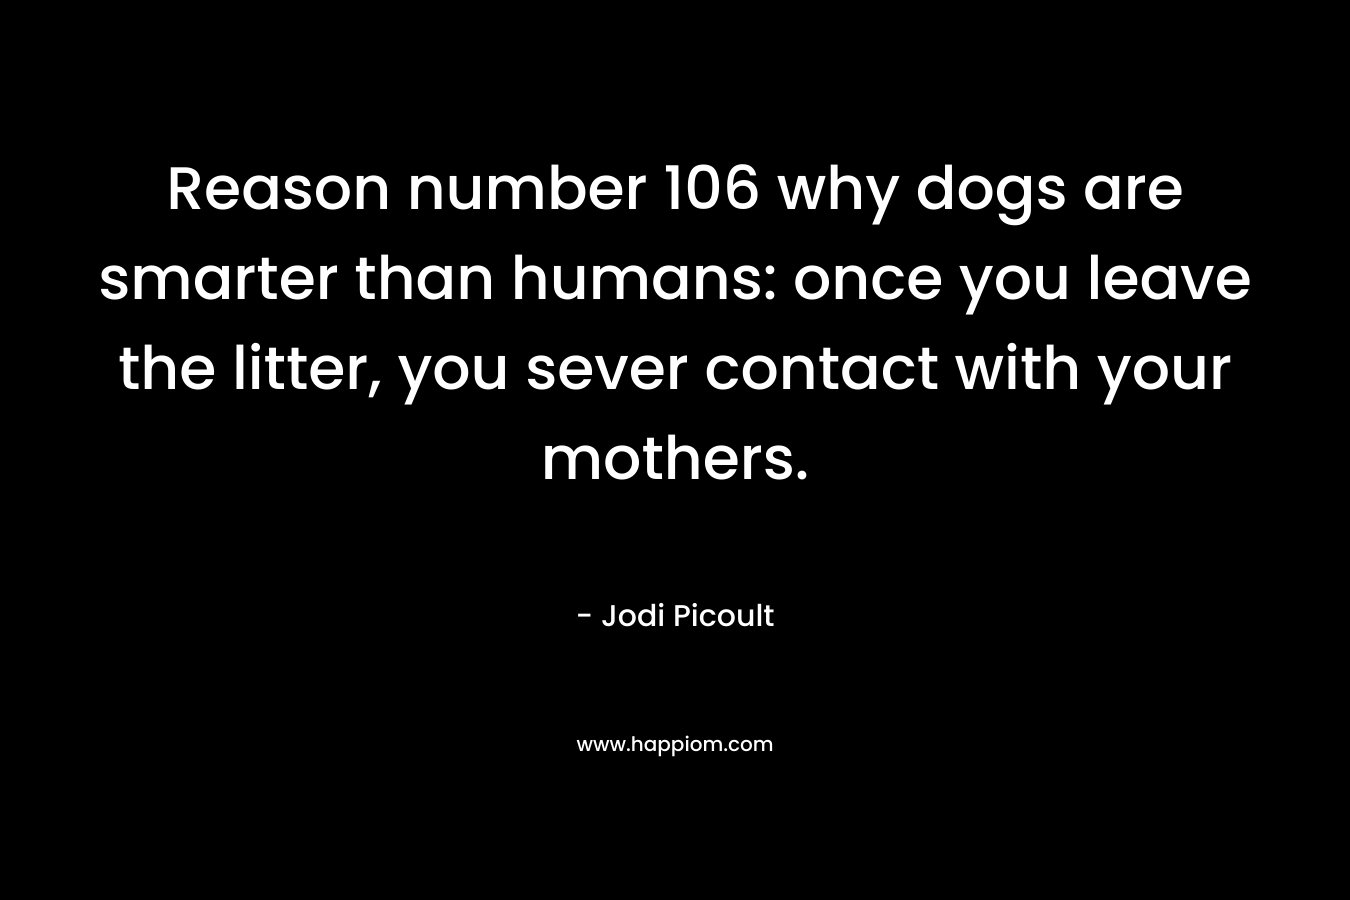 Reason number 106 why dogs are smarter than humans: once you leave the litter, you sever contact with your mothers. – Jodi Picoult